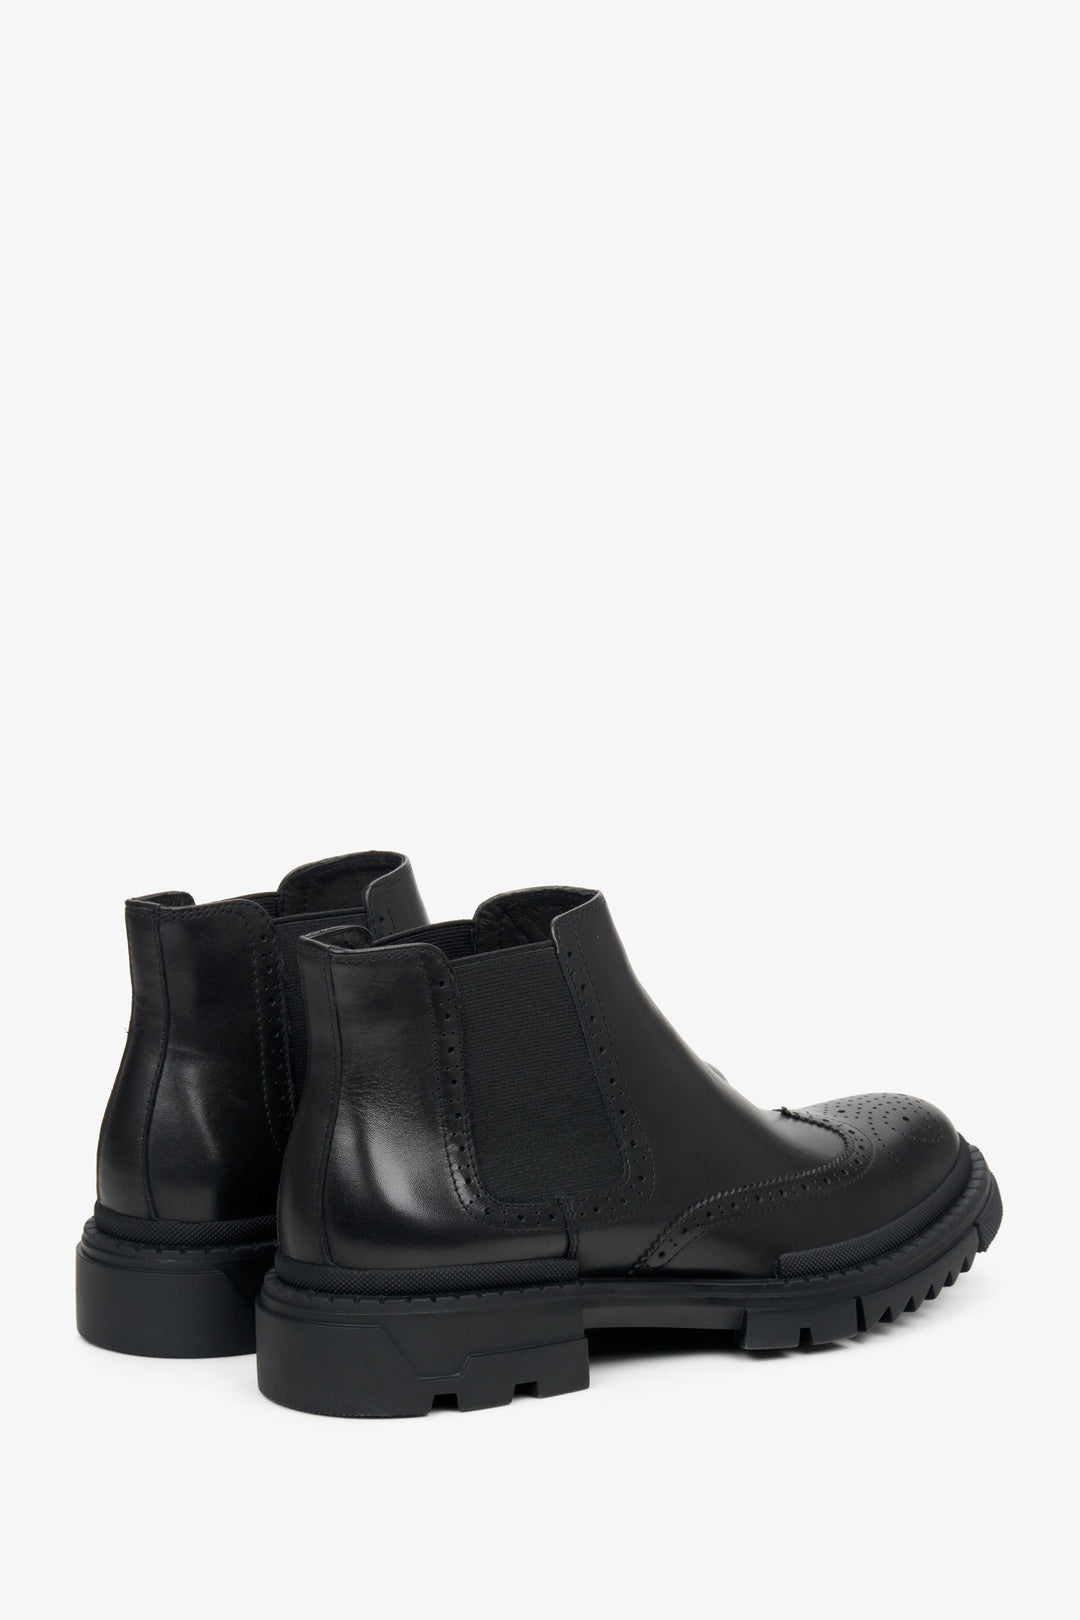 Men's low black ankle boots made of genuine leather - close-up on the side and back of the footwear.